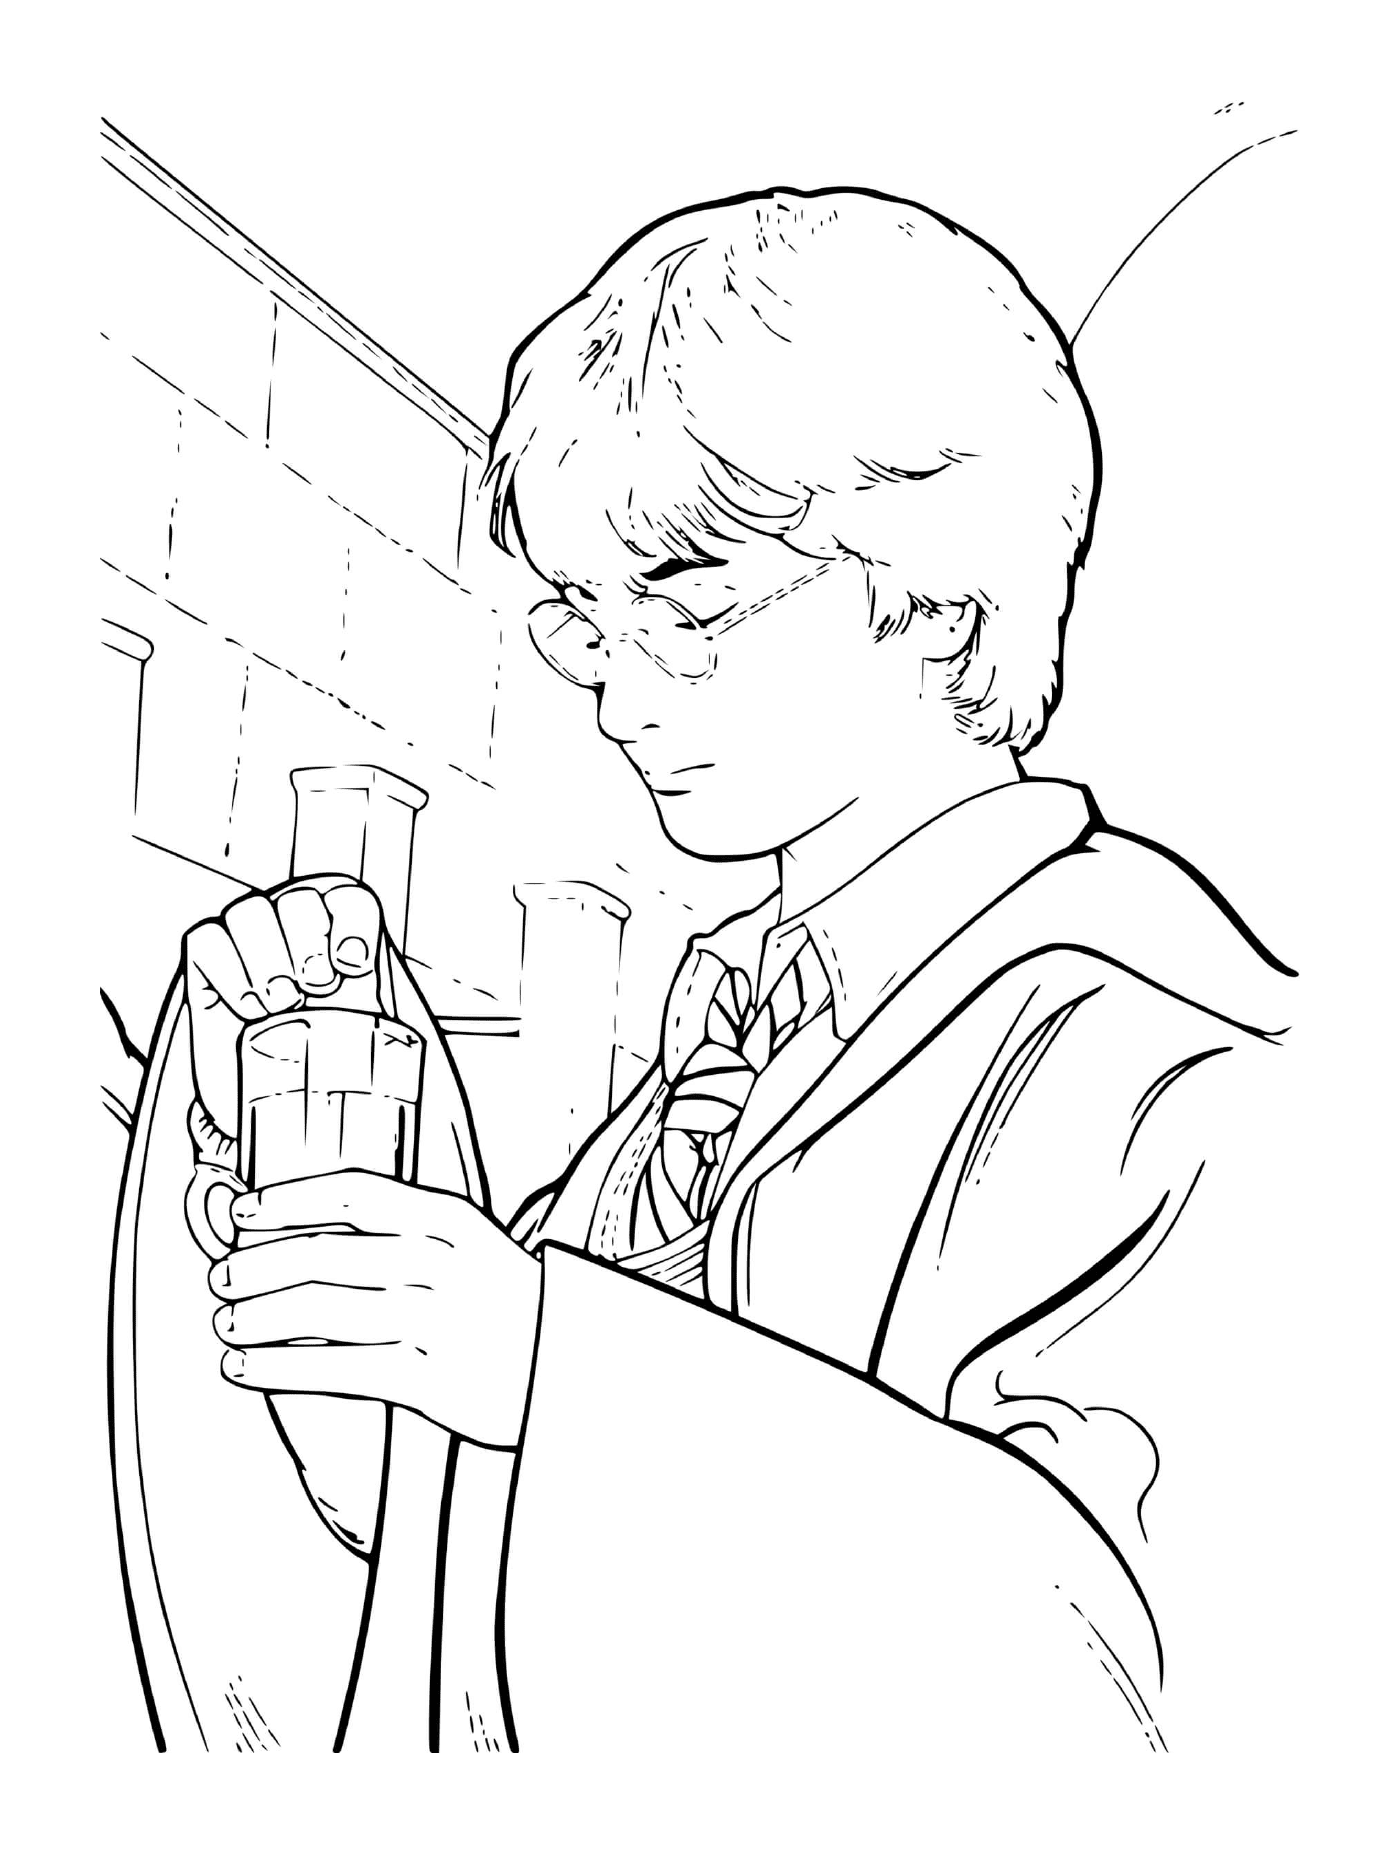  Harry takes potion, glass in the hand 